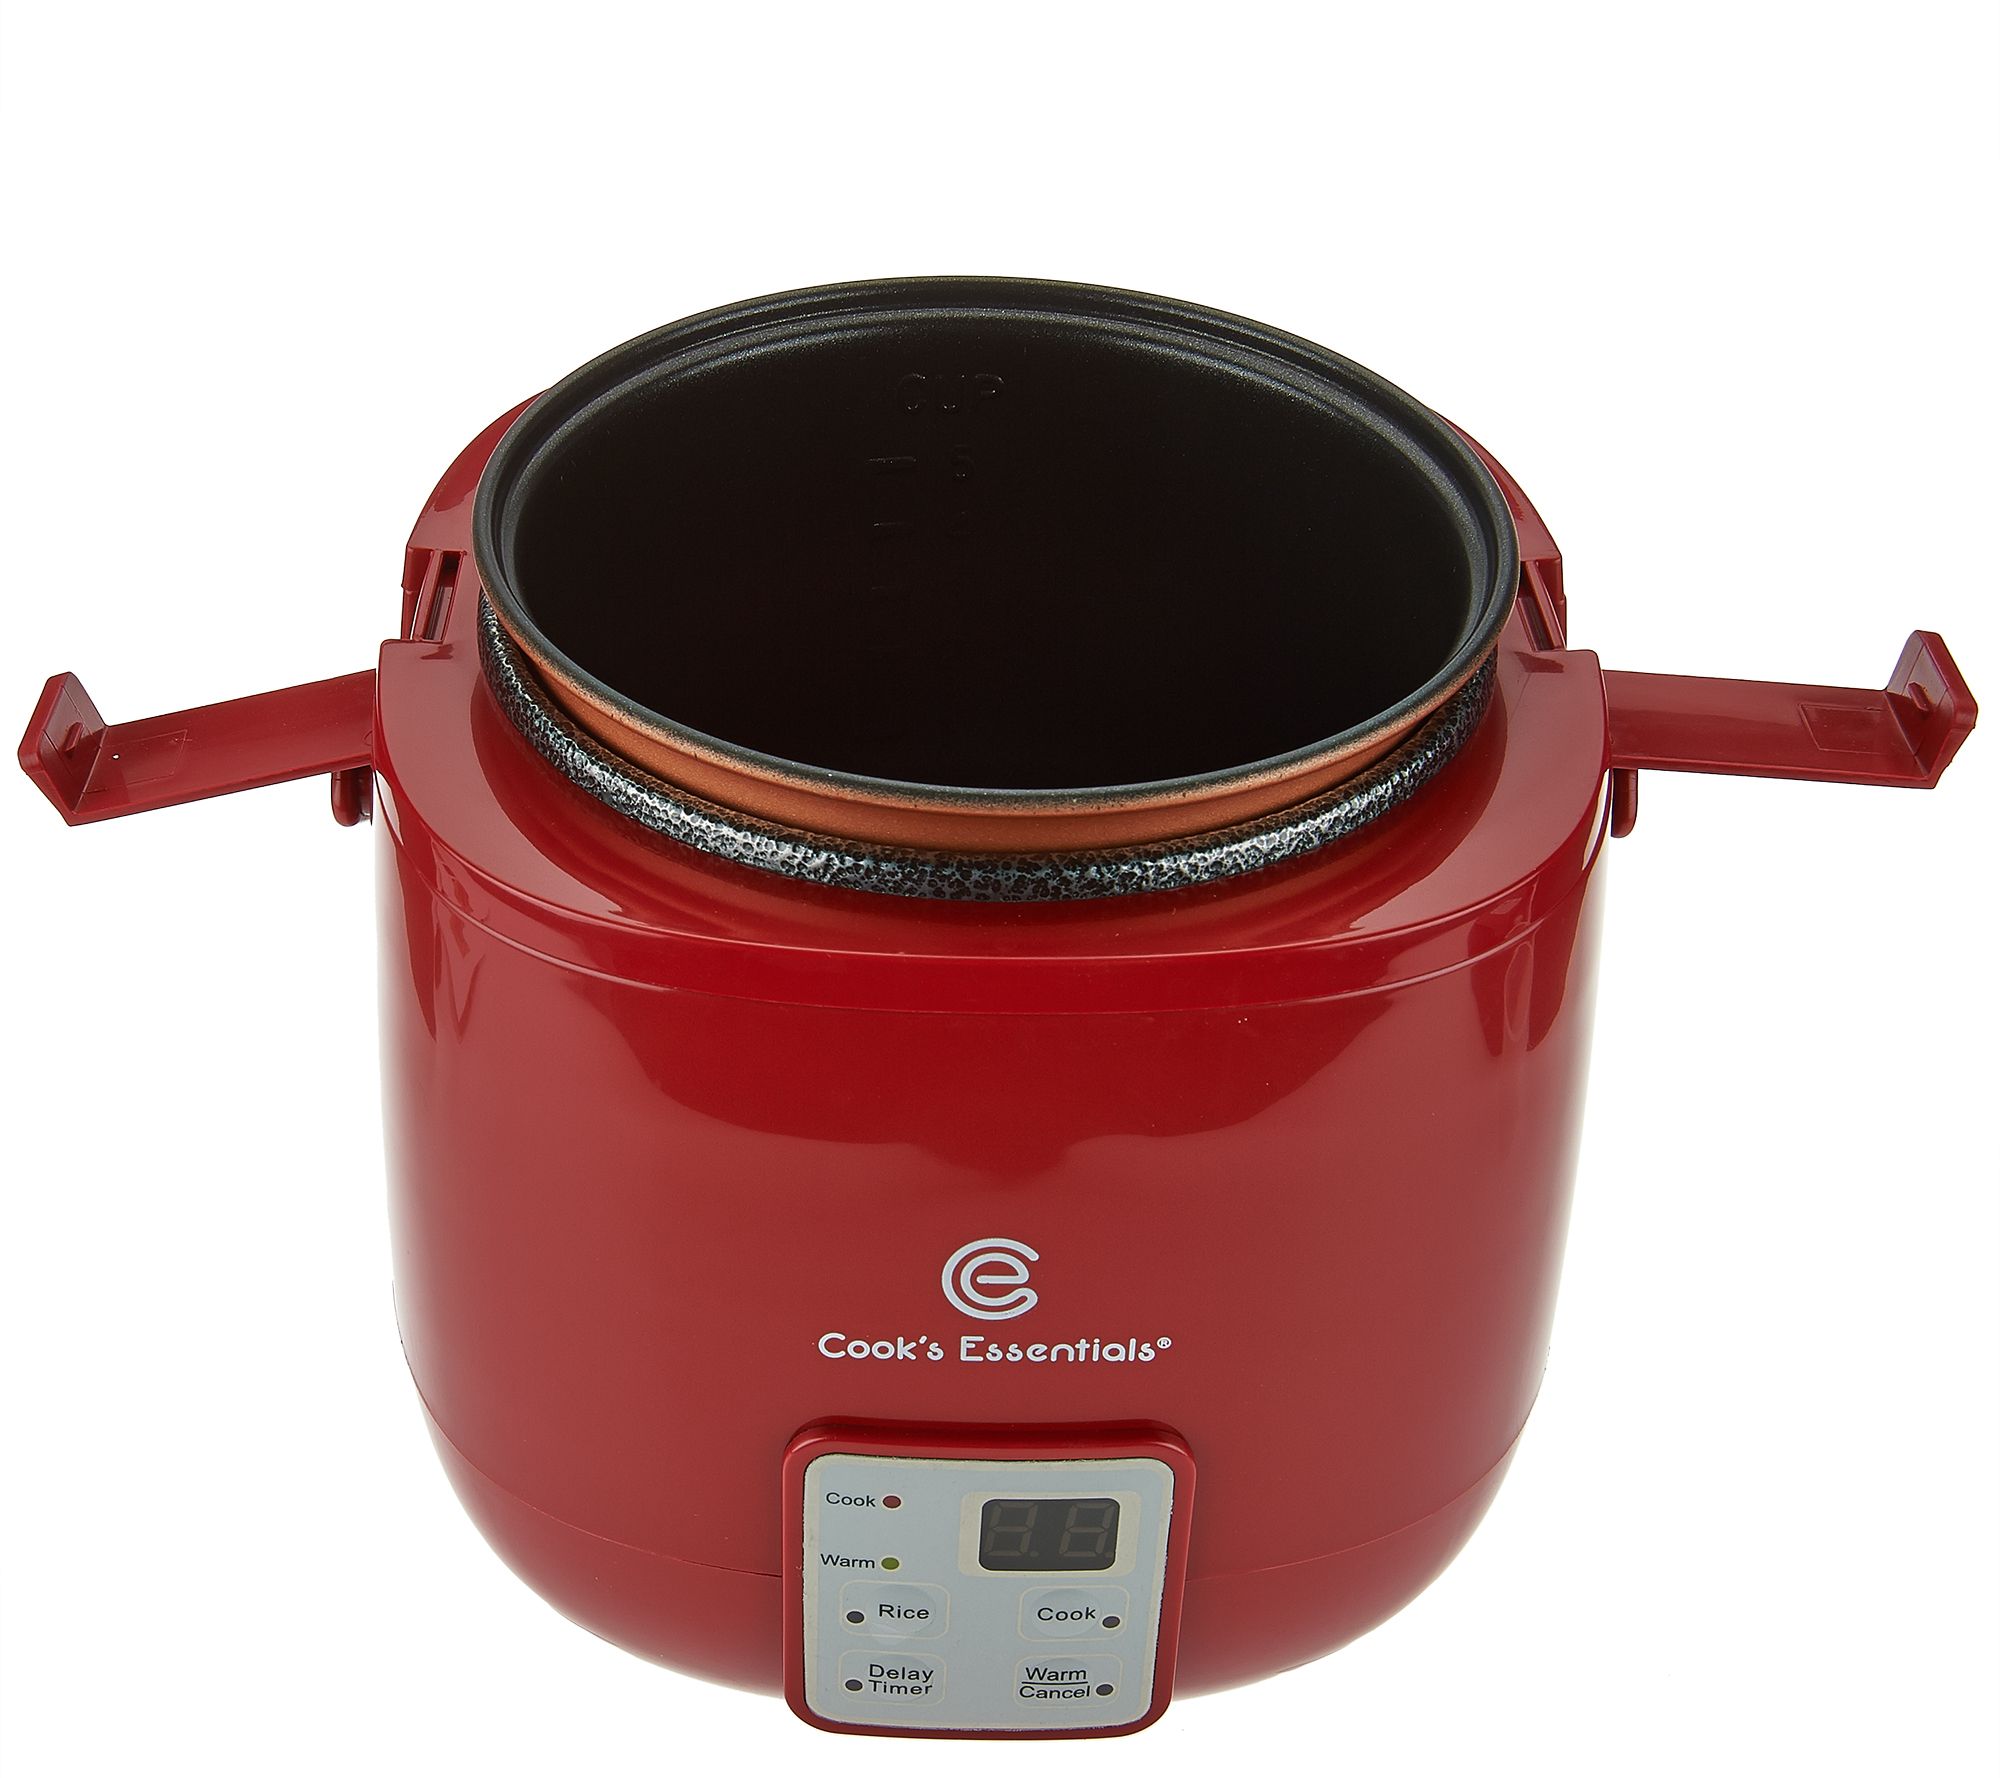 CooksEssentials 5 Cup Digital Perfect Cooker w/ Recipes on QVC